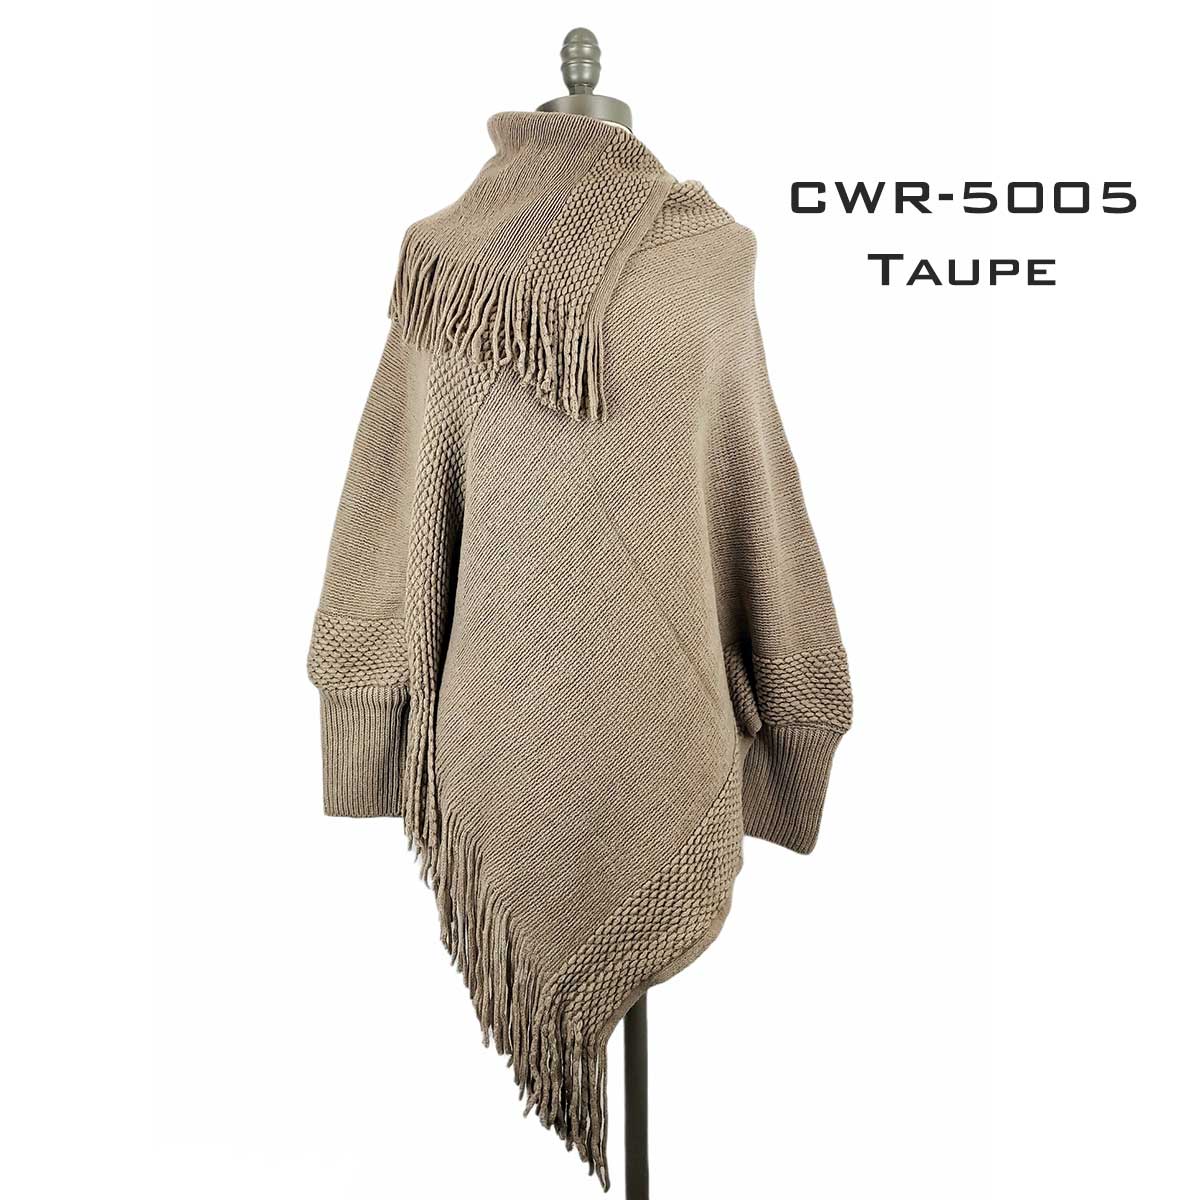 CWR5005 TAUPE Poncho with Sleeves